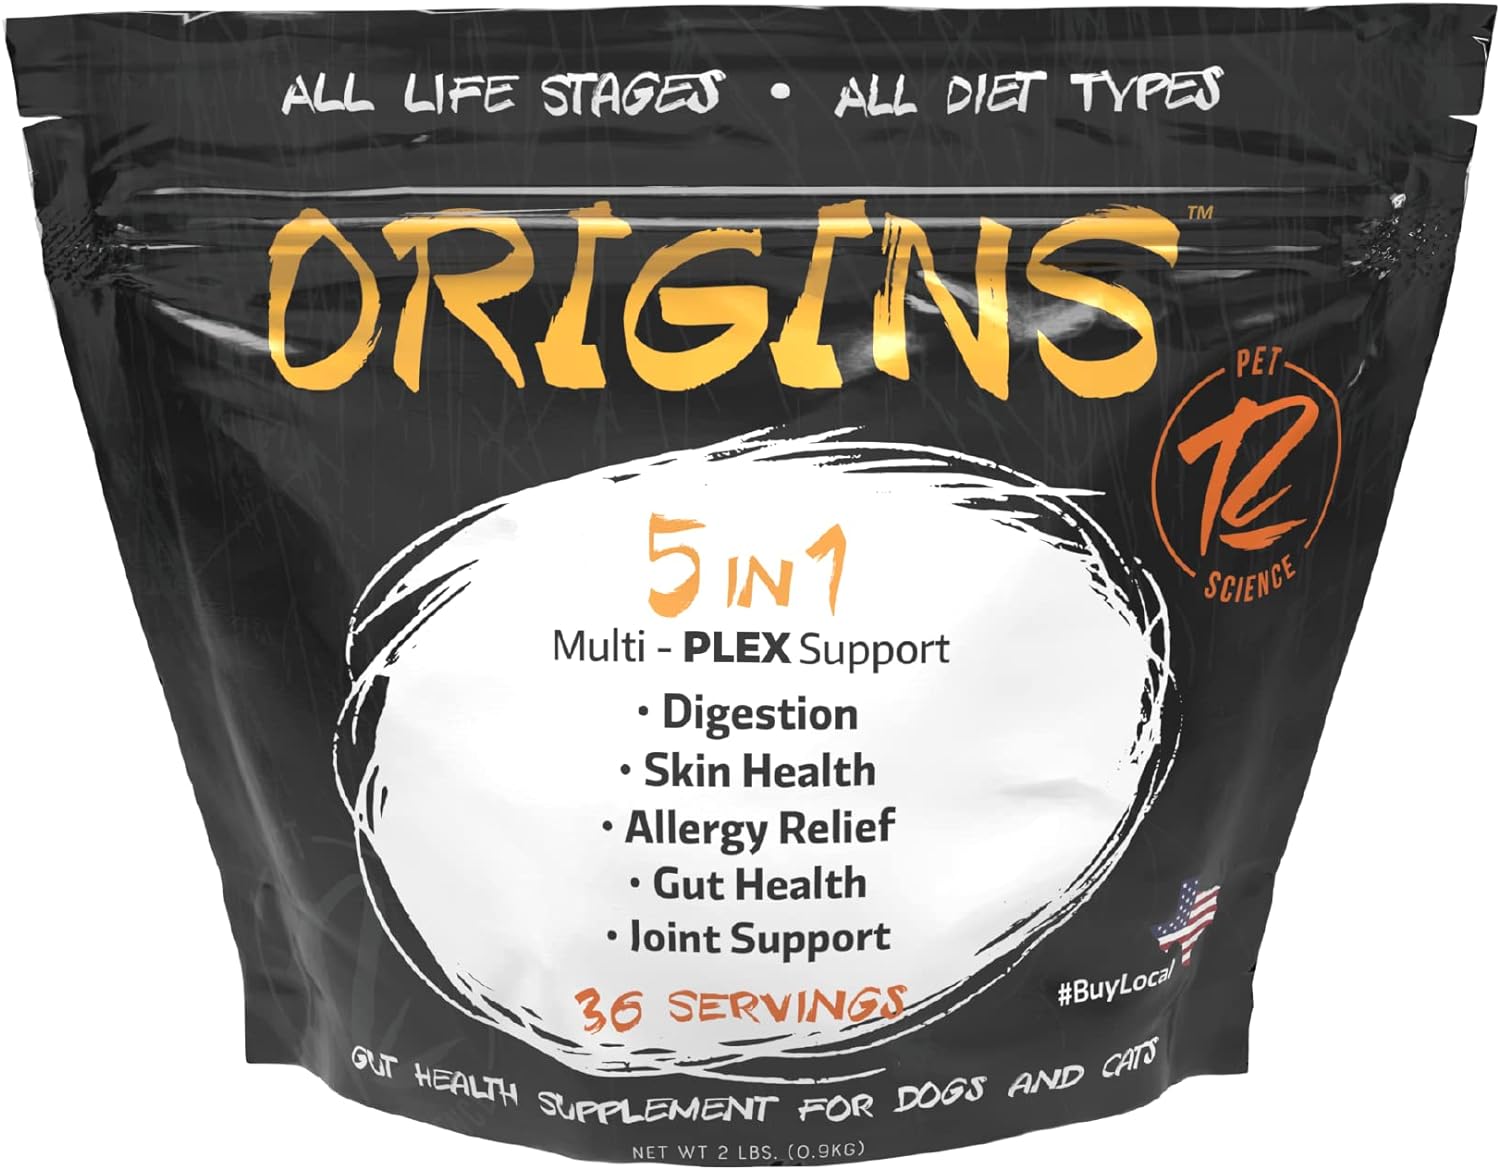 Origins 5-in-1 Dog Supplement - Powdered Food Topper w/Natural Omega 3 Fish Oil - Supports Healthy Digestion, Skin, and Coat - Helps Reduce Itching & Joint Inflammation (2 lbs)